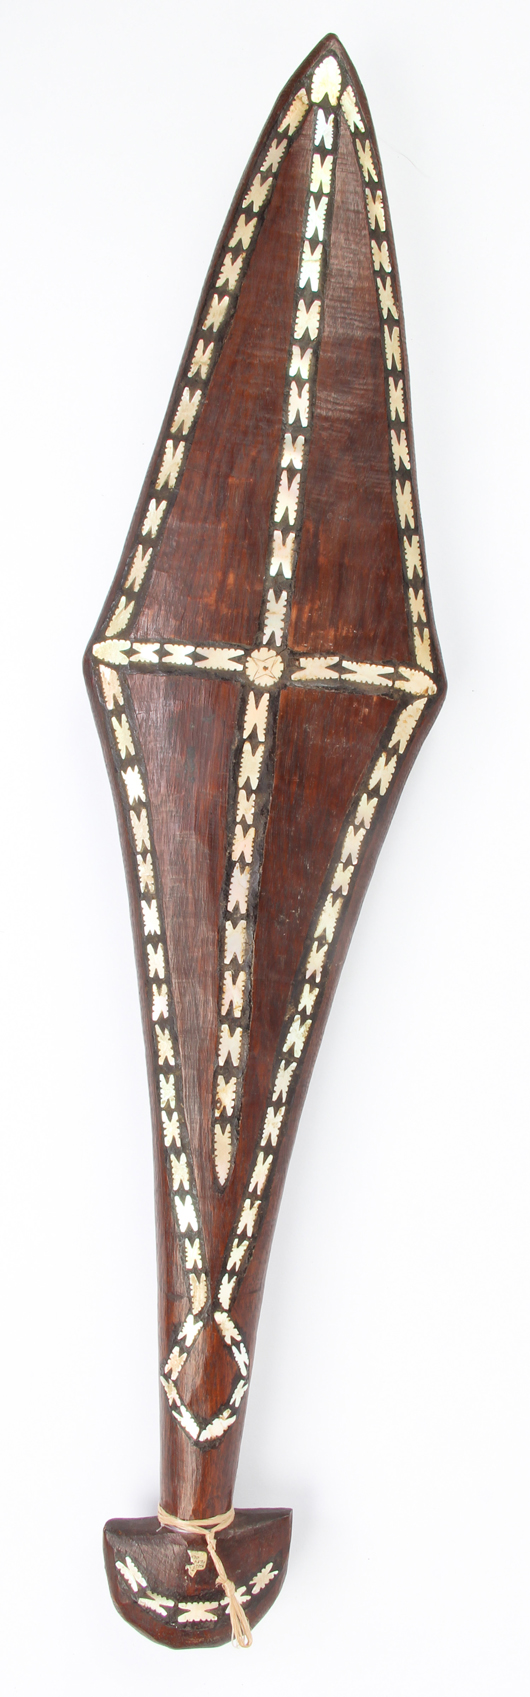 Solomon Islands ceremonial paddle, carved wood inlaid with pearl shell, 28 1/2 x 7 x 1 inches (72 x 18 x 3 cm). Estimate: $1,500-$2,500. Material Culture image.